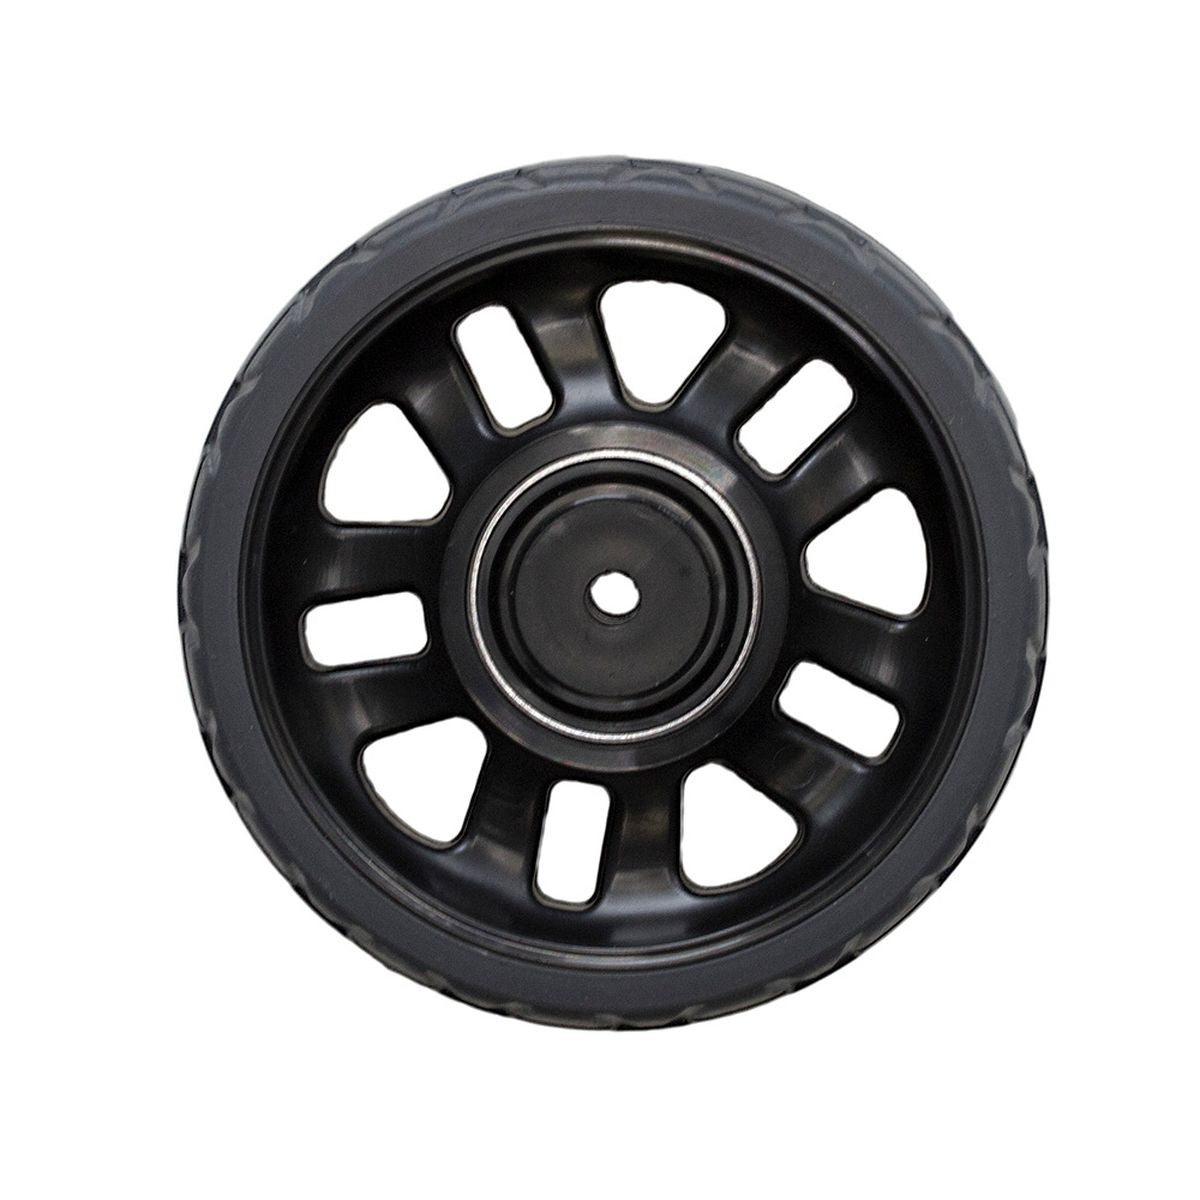 Spare wheel for Duffle RS and Duffle RG